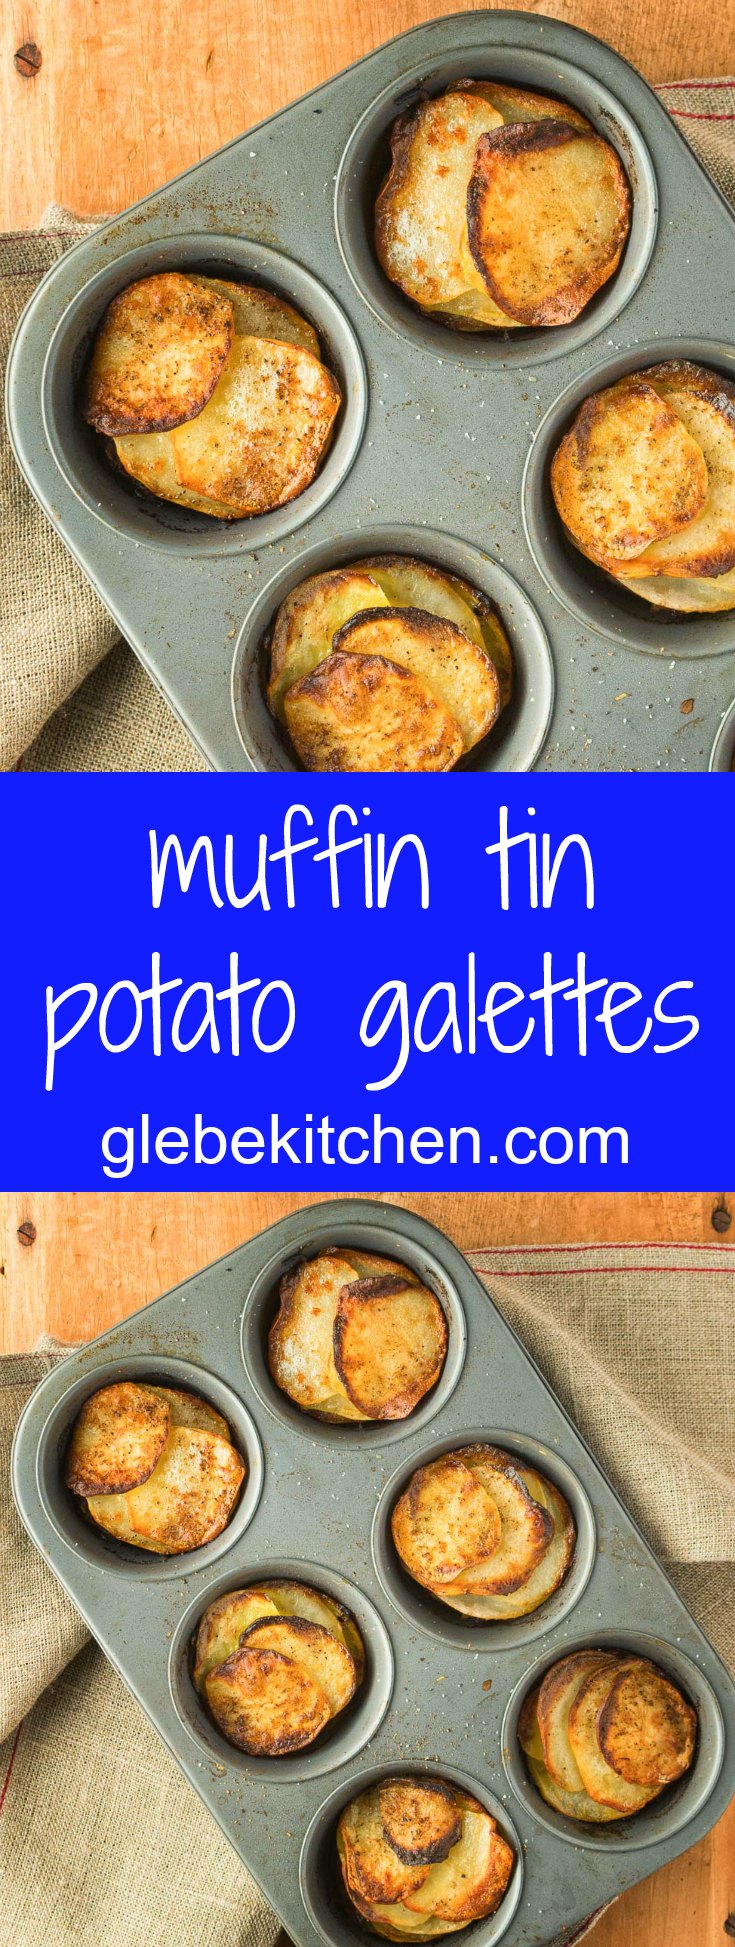 Potato galettes are a great addition to your side dish repertoire.